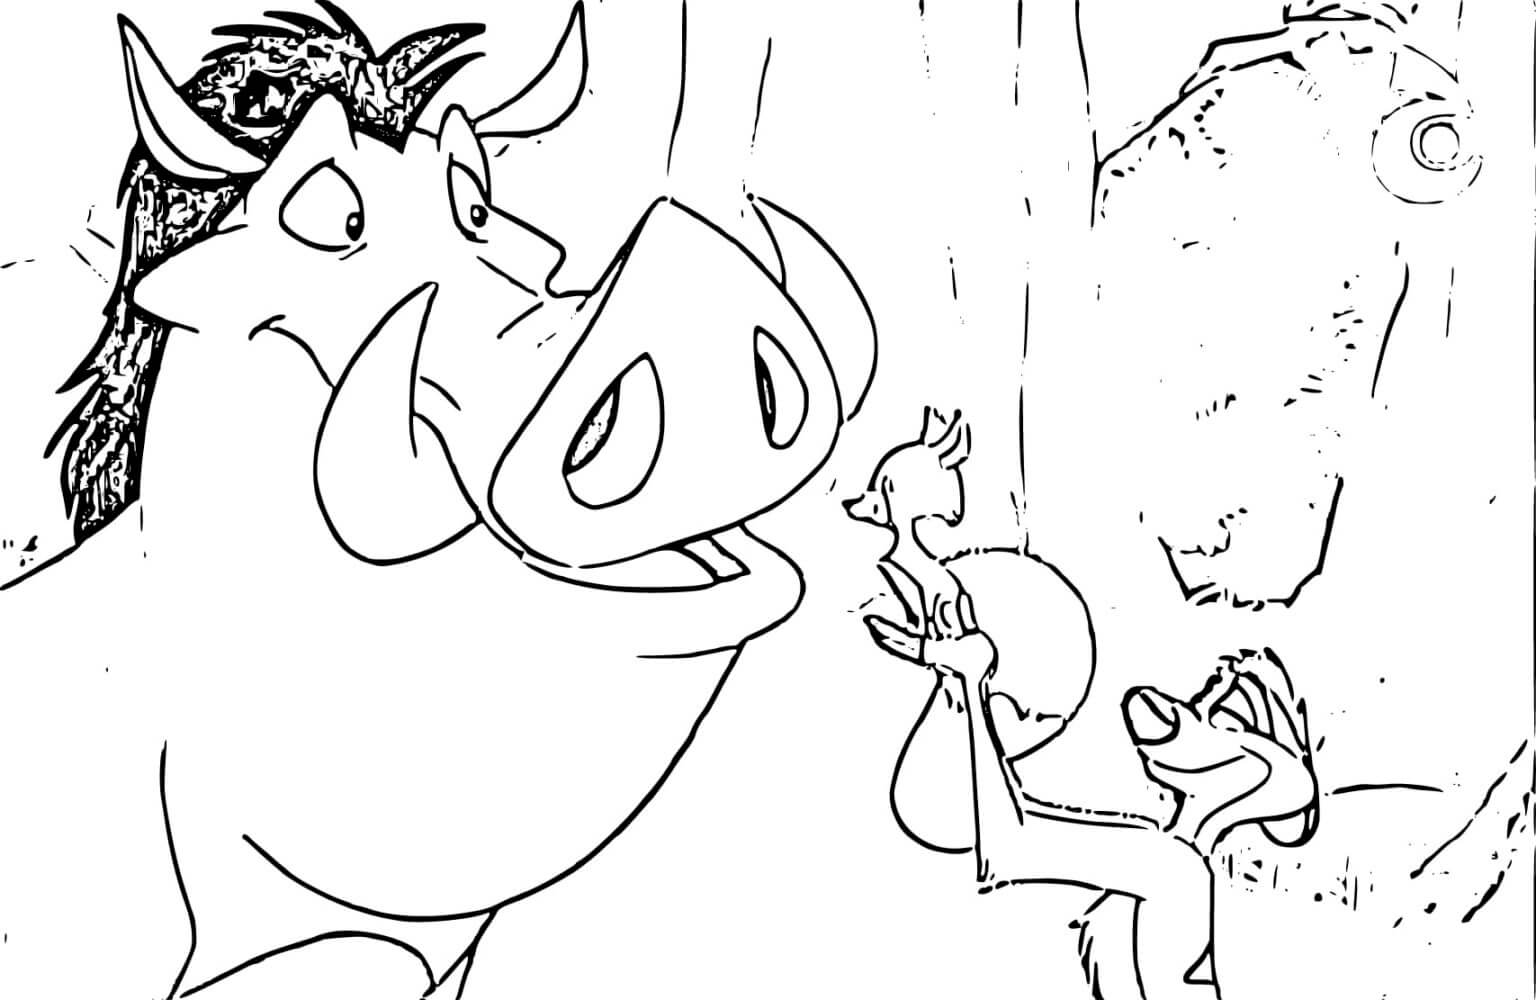 Timon Holding Bird And Pumbaa coloring page - Download, Print or Color ...